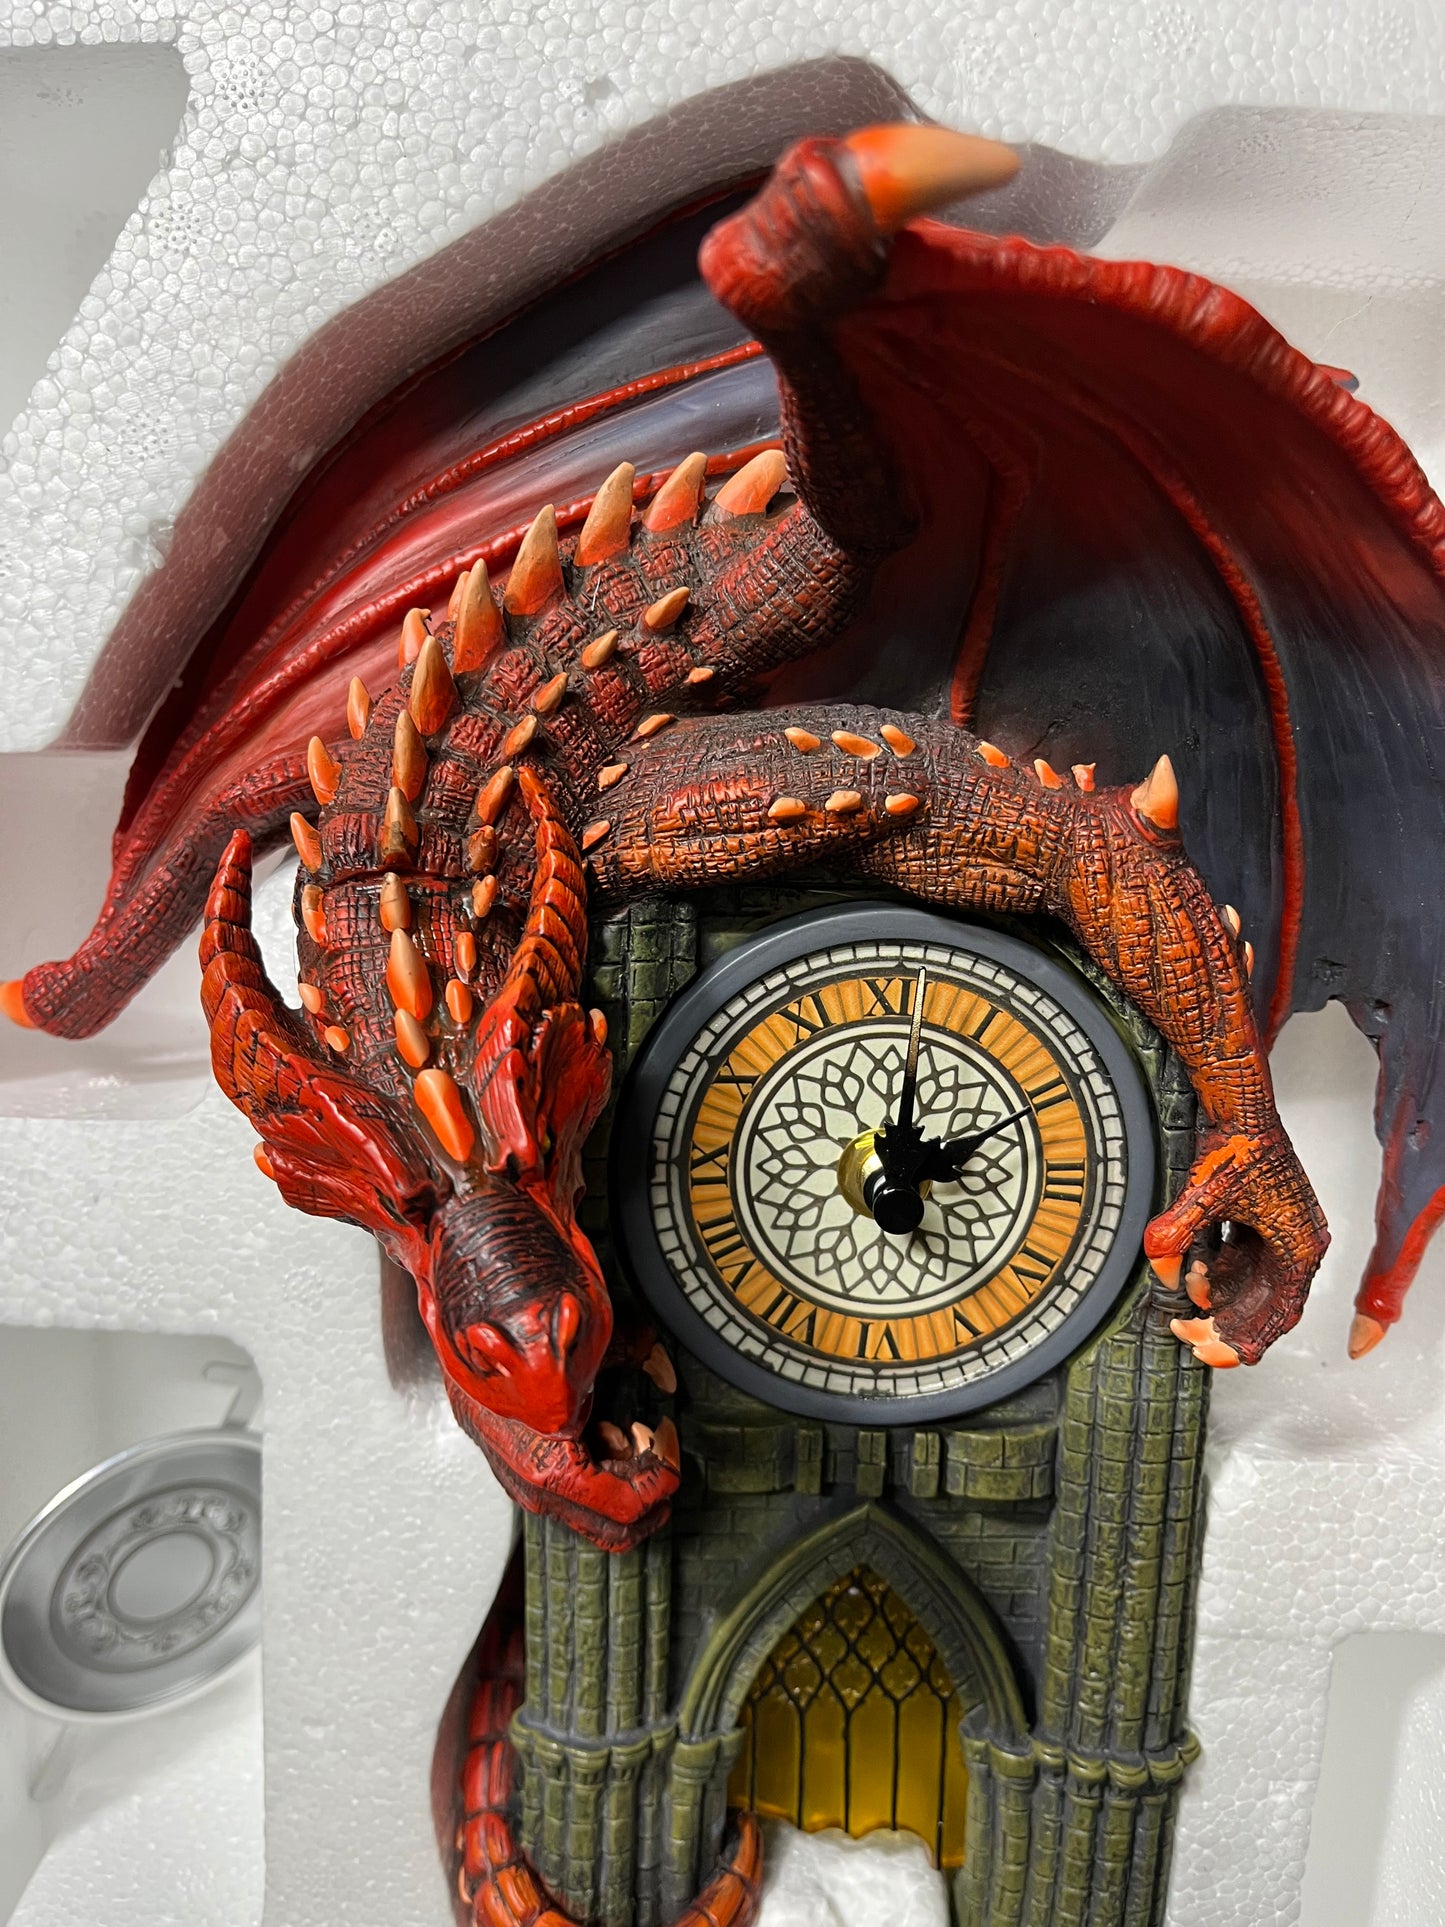 Bradford Exchange Reign of Fire Dragon Illuminated Wall Clock with Sound 2017